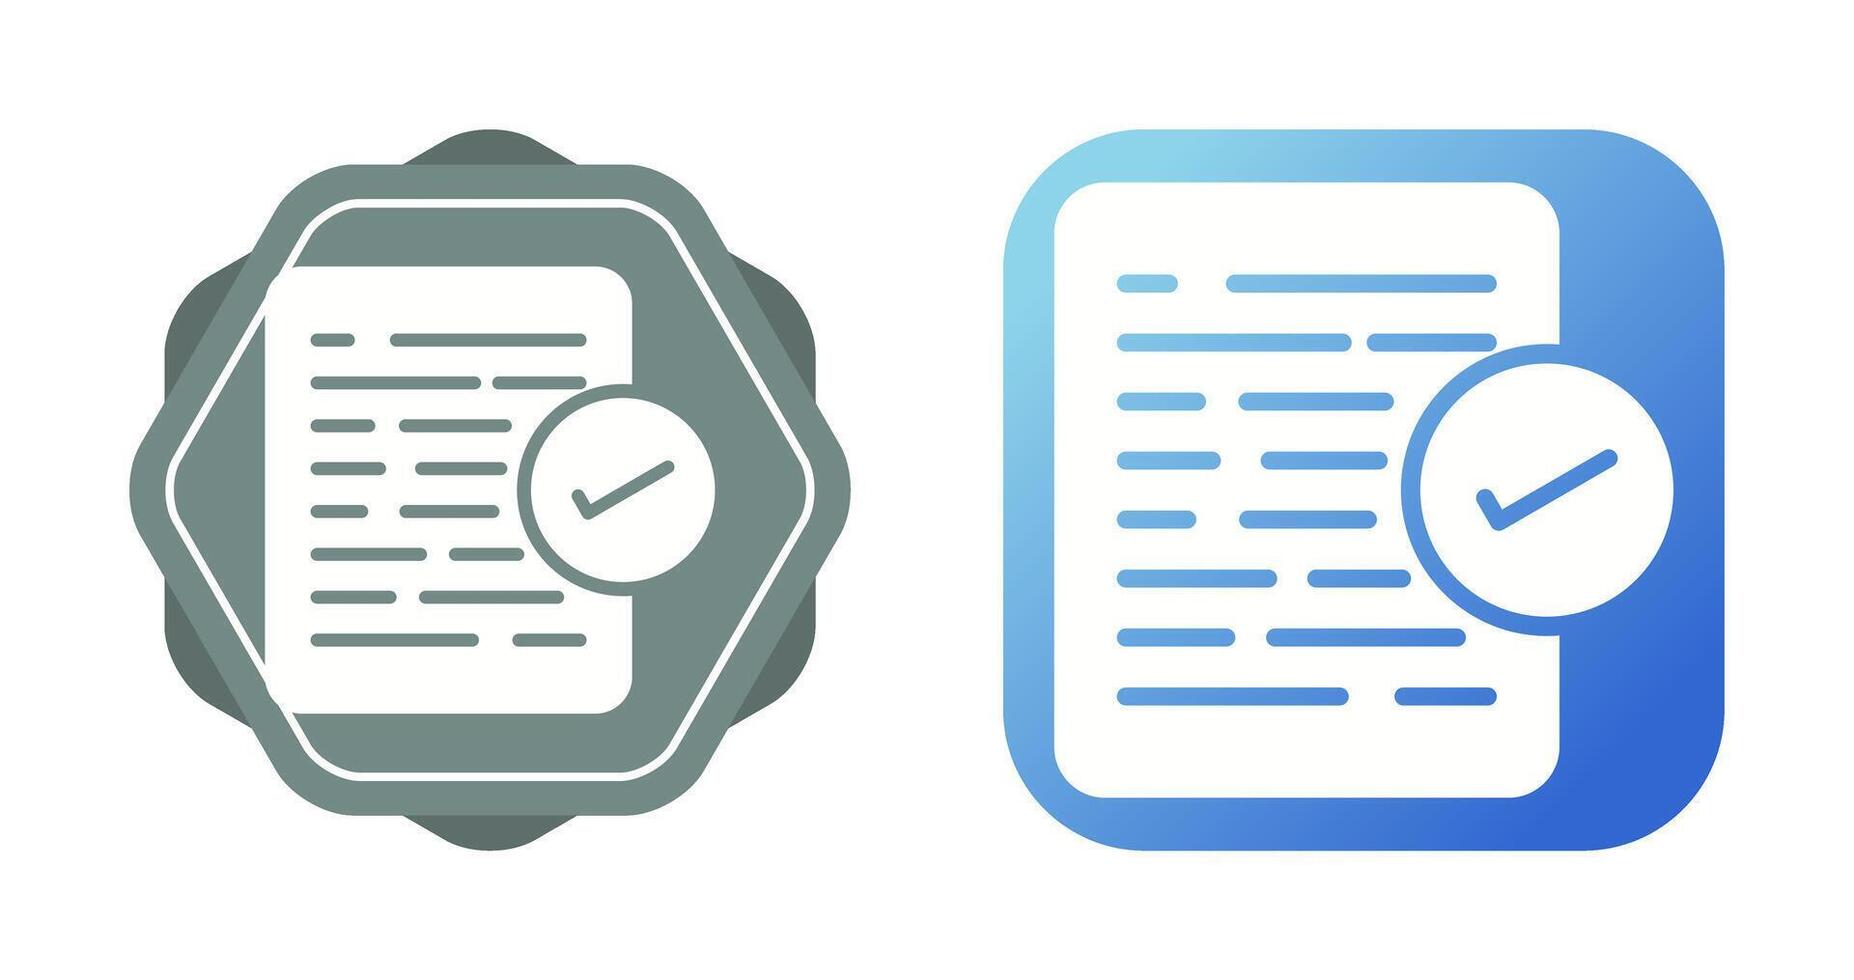 Document Approval Vector Icon